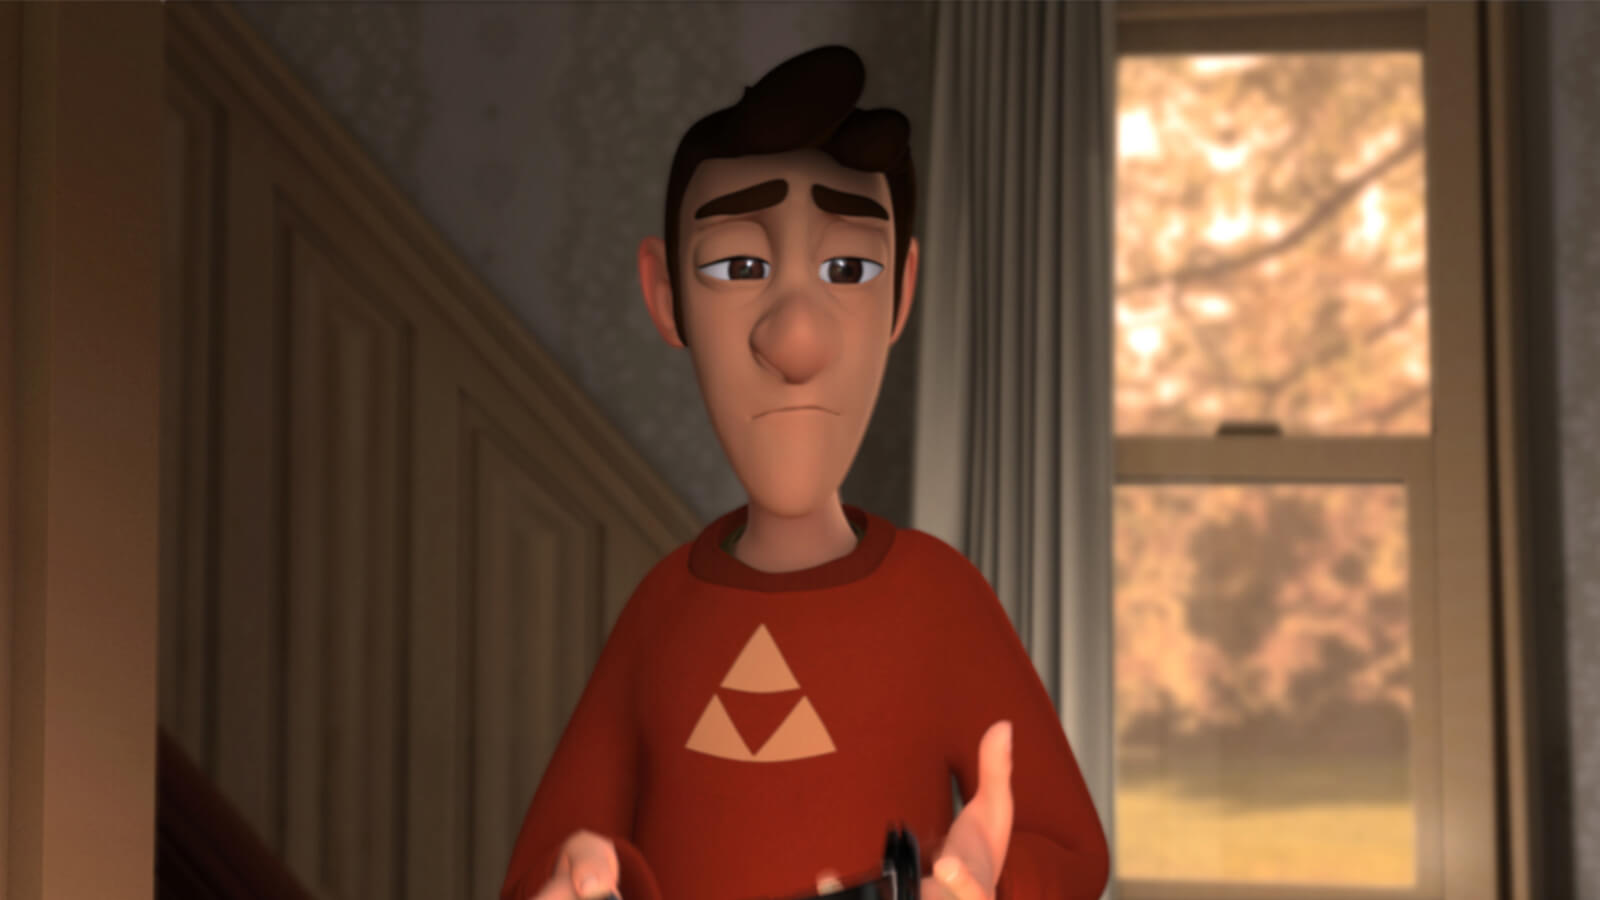 Man in a red sweater with a yellow triforce logo looks pensive next to a staircase and window